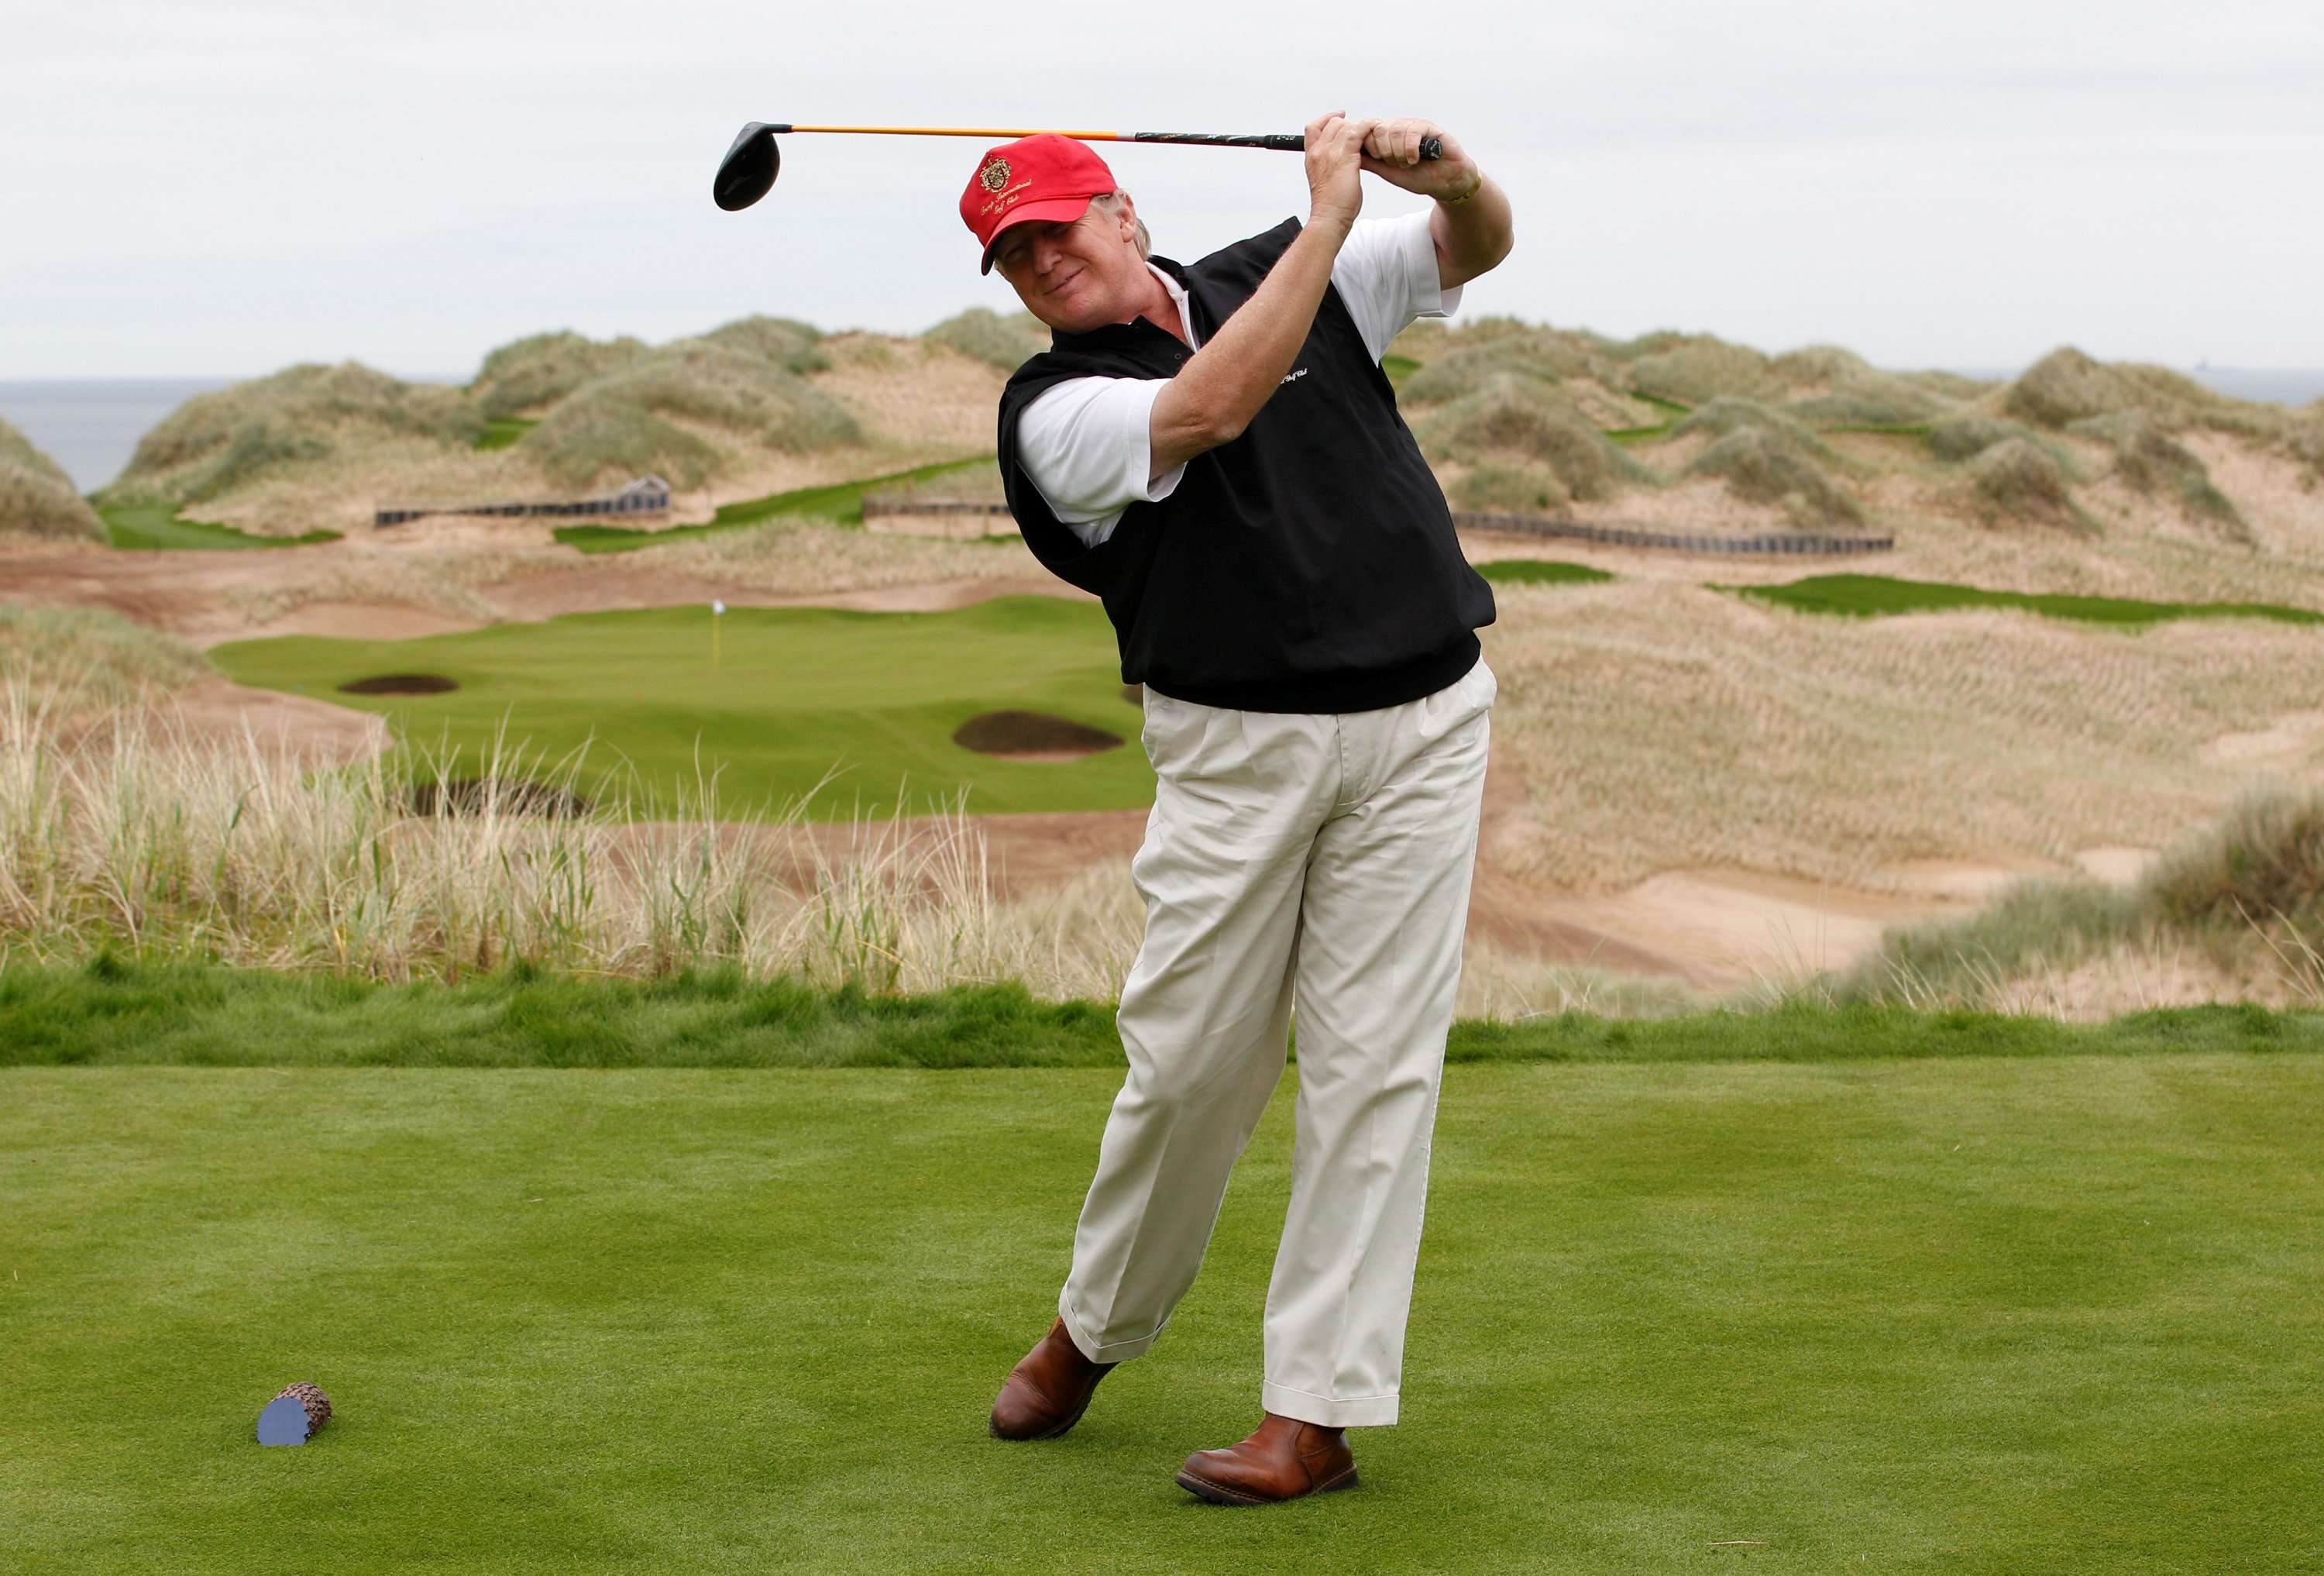 image for North Korea: Senile Donald Trump Plays Too Much Golf